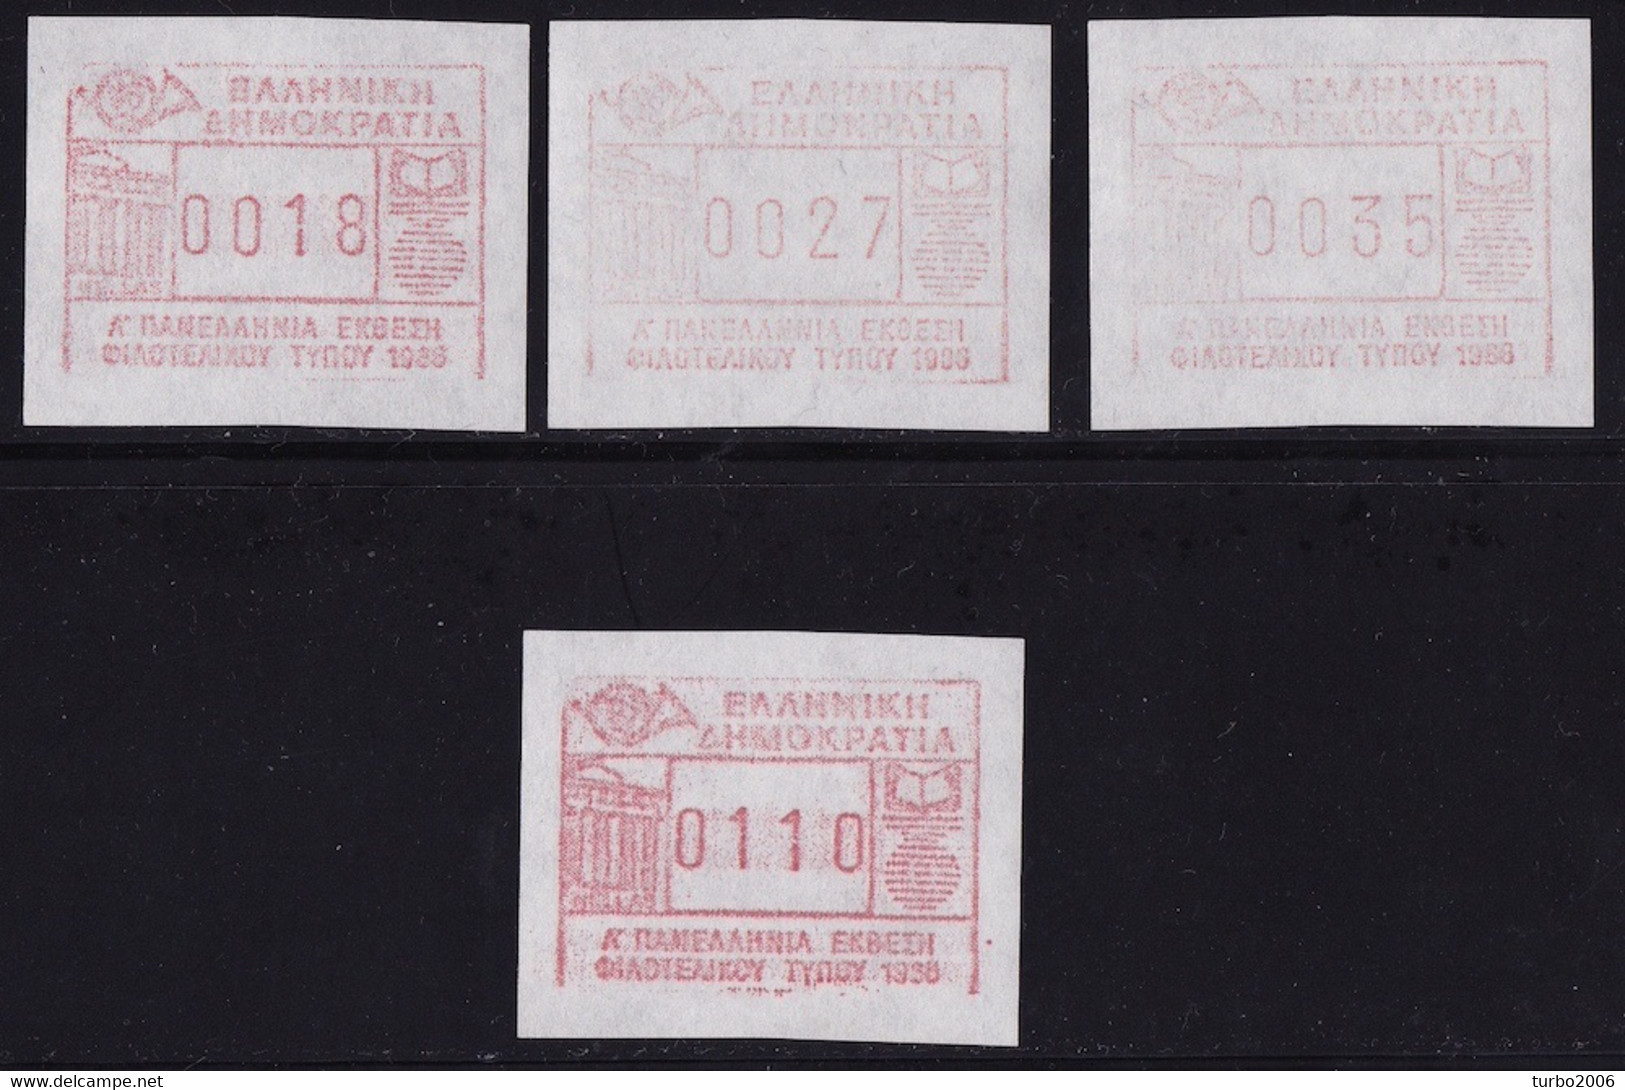 GREECE 1986 FRAMA Stamps For Panhelenic Literature Exhabition Set Of 18-27-35 DR + 110 Dr MNH Hellas M 12 - Timbres De Distributeurs [ATM]